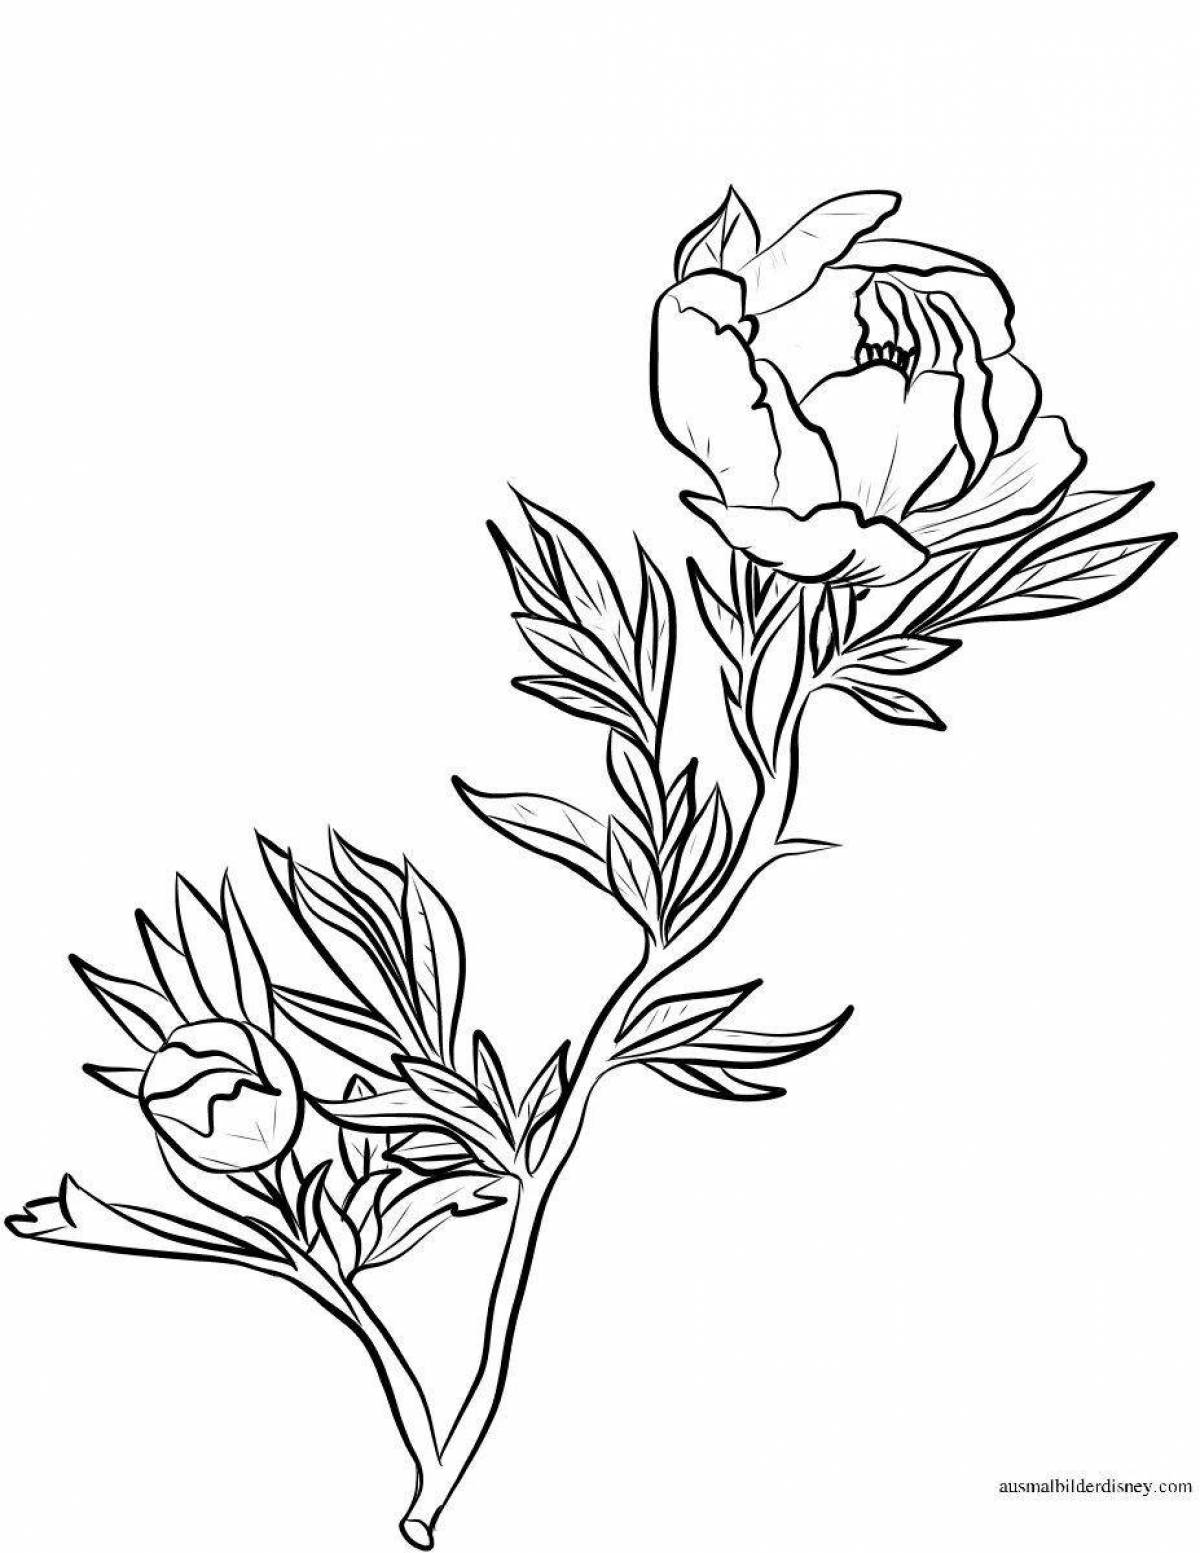 Coloring page graceful azure flower